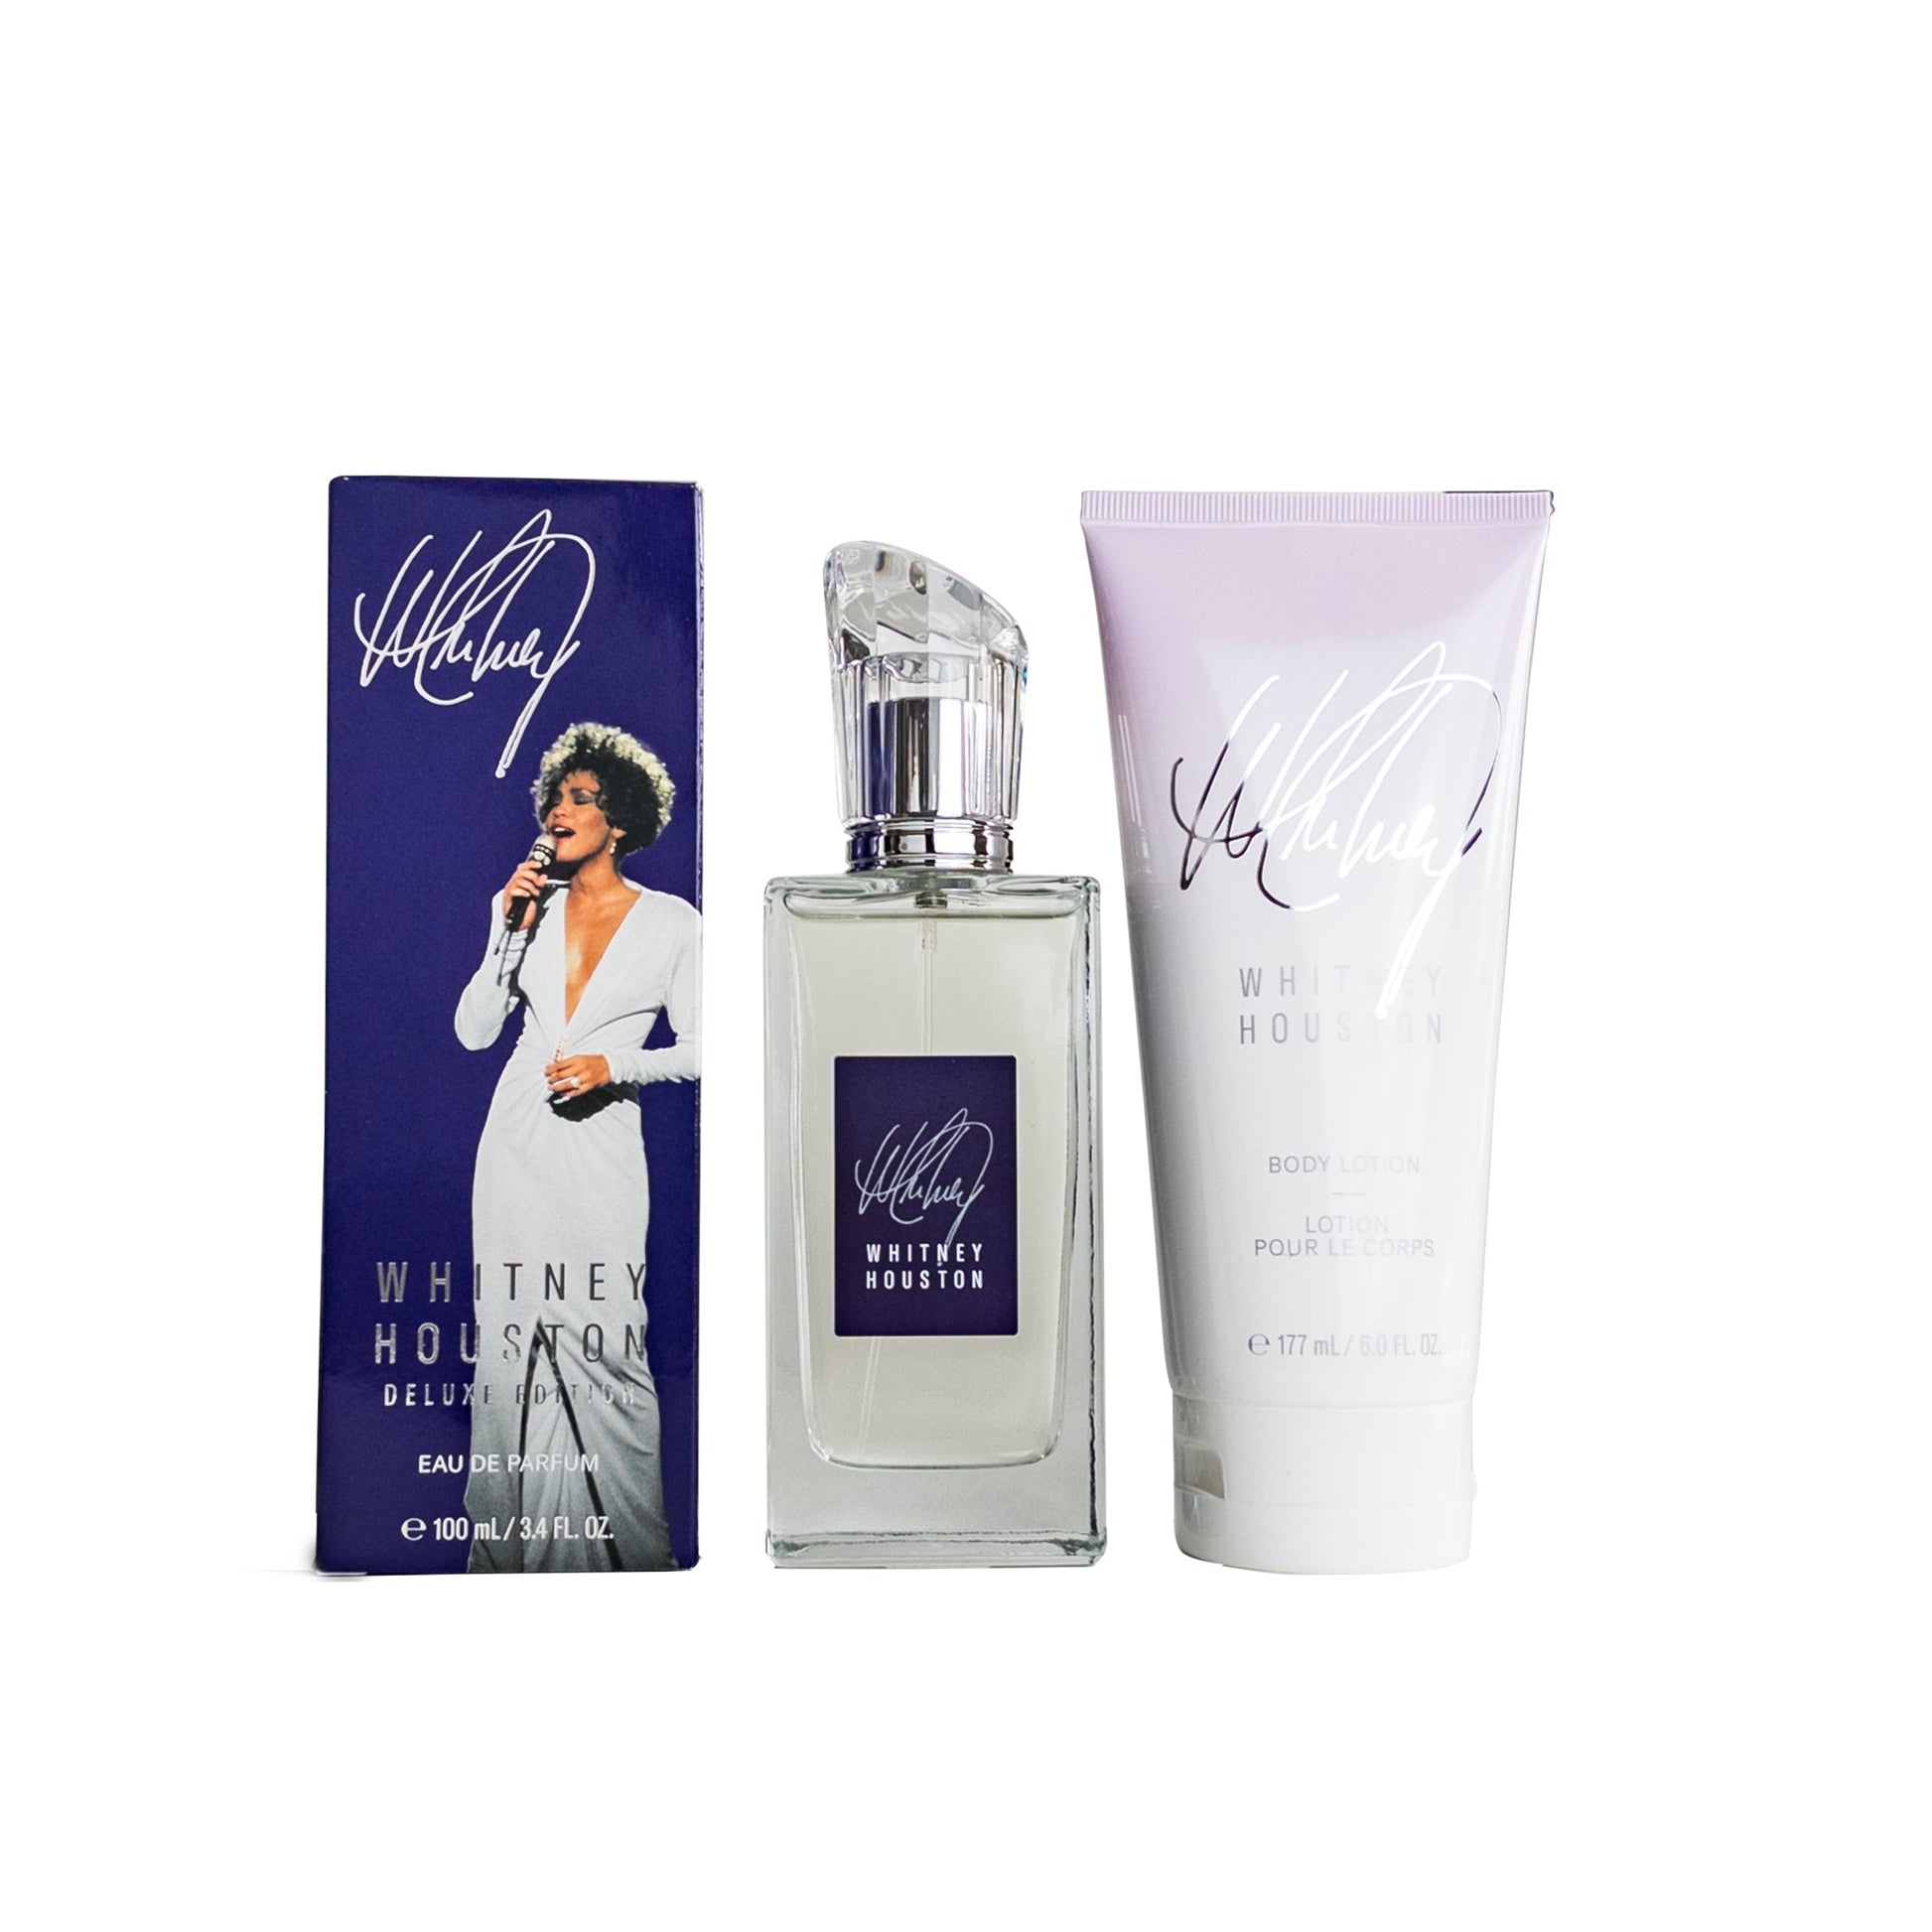 Whitney Gift Set EDP Spray and Body Lotion for Women by Whitney Houston, Product image 1